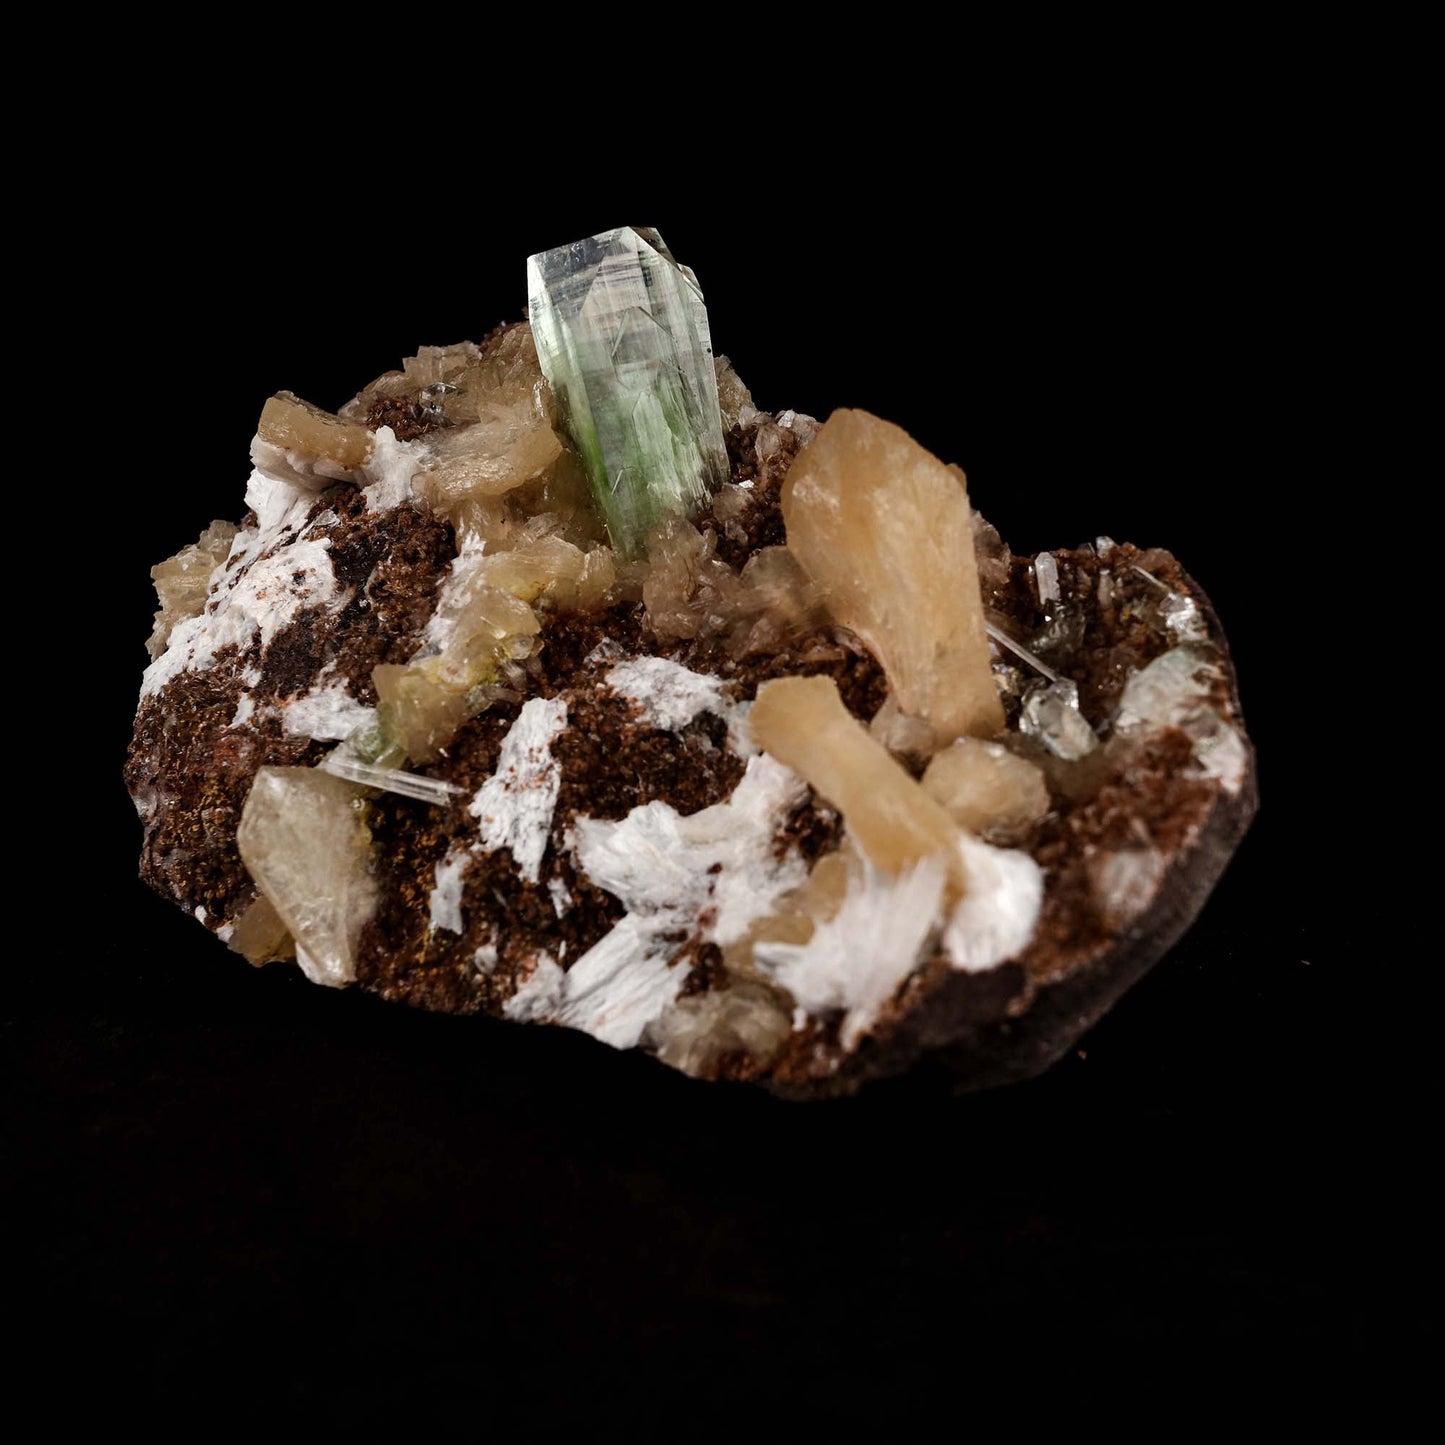 Green Apophyllite with Stilbite on Heulandite Natural Mineral Specimen…  https://www.superbminerals.us/products/green-apophyllite-with-stilbite-on-heulandite-natural-mineral-specimen-b-5180  Features: Transparent green apophyllite crystals long with lustrous crystal faces and steep pyramidal terminations on matrix coated with lustrous peach-baggie coloured Stilbite crystals of varying sizes. Primary Mineral(s): Apophyllite Secondary Mineral(s): StilbiteMatrix: N/A 6 Inch x 4 InchWeight : 735 GmsLocality: